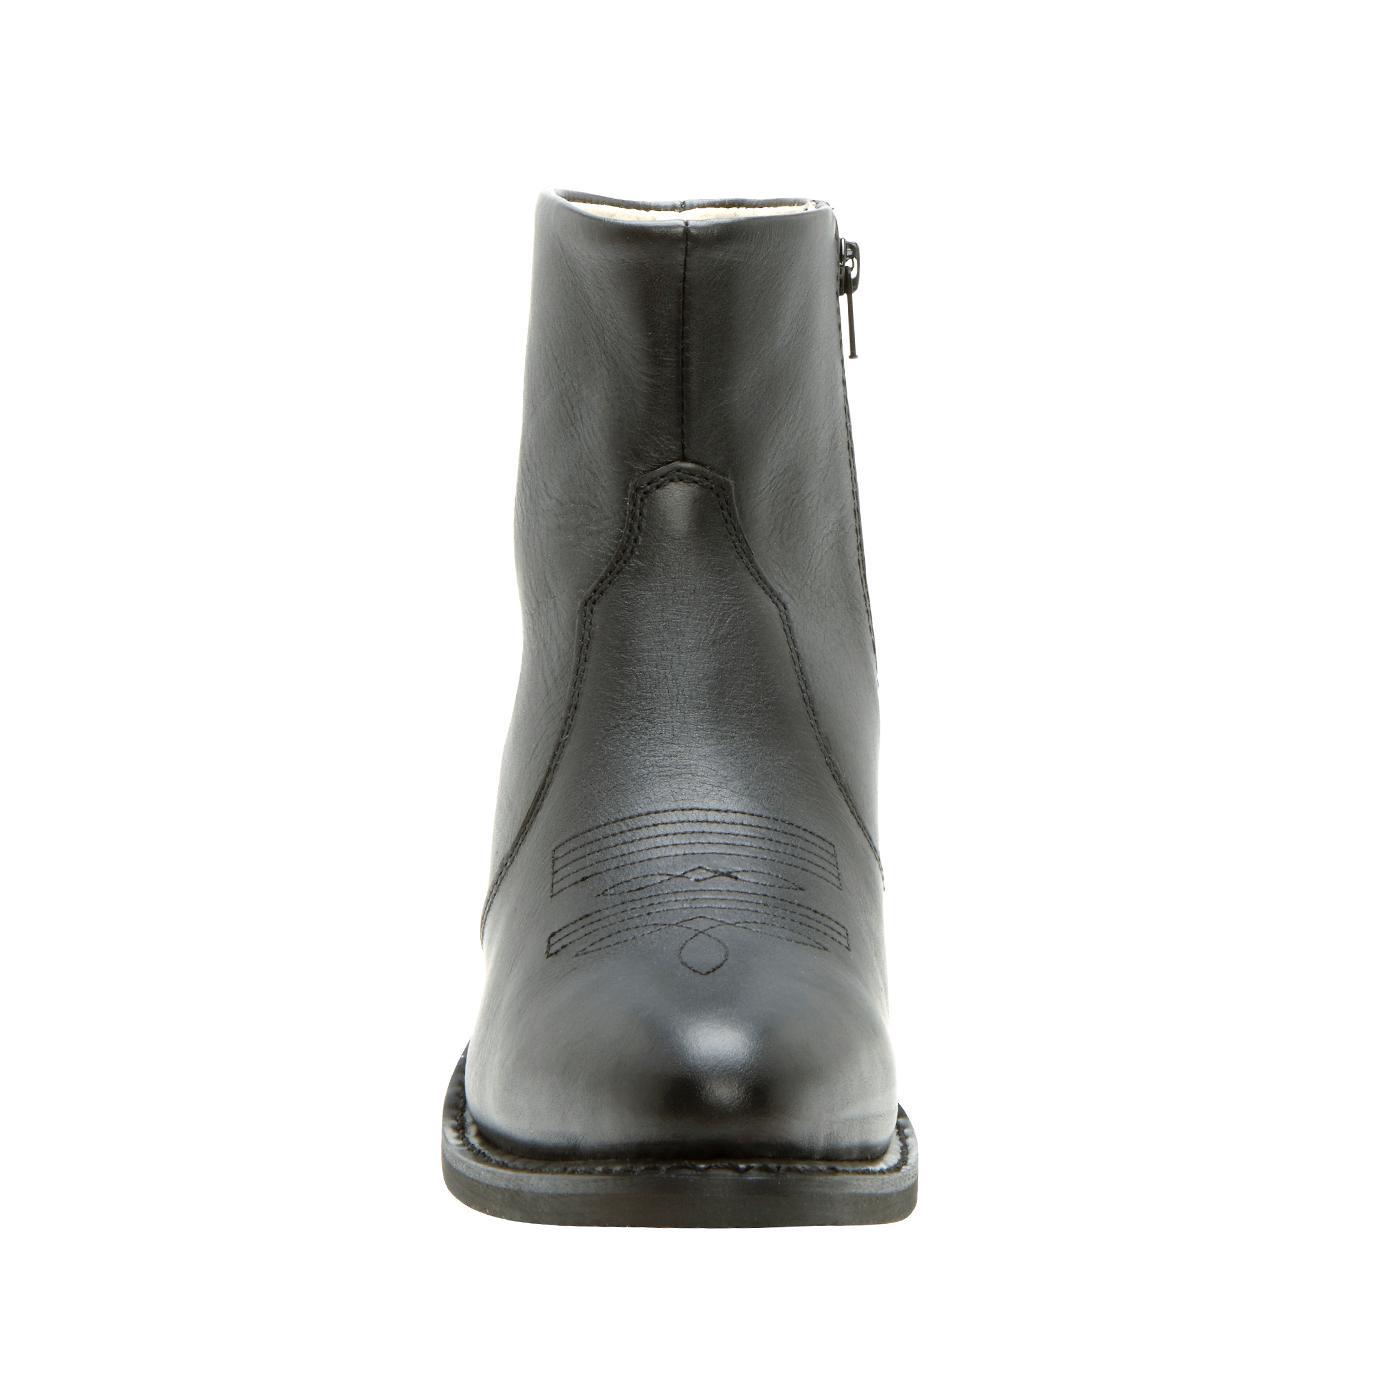 Durango Boots: Men's Black Leather Side Zip Western Boots - Style #DB950